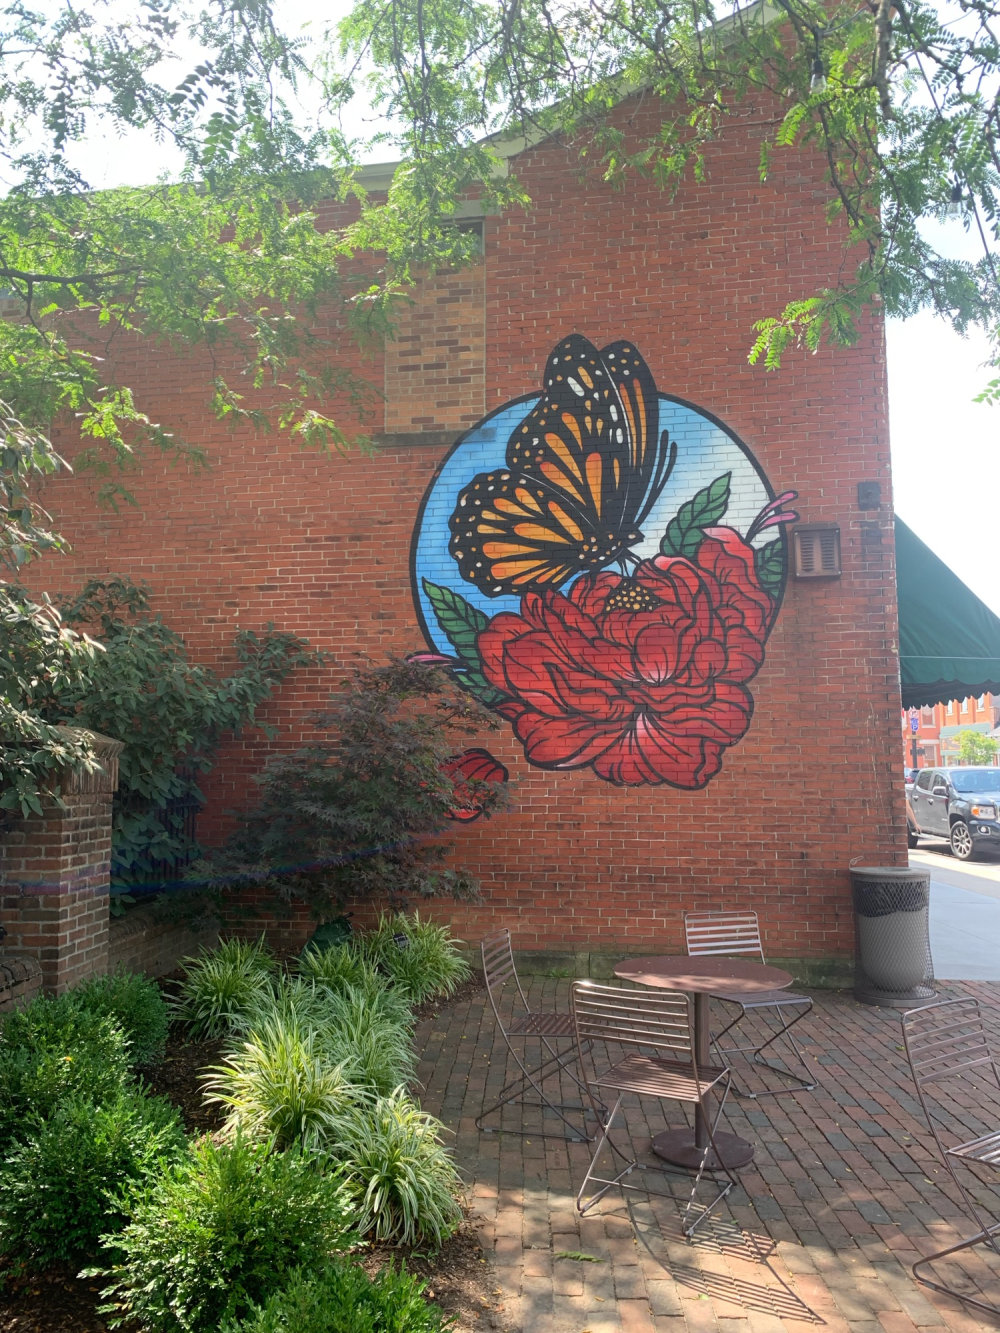 mural in Westerville by artist unknown.